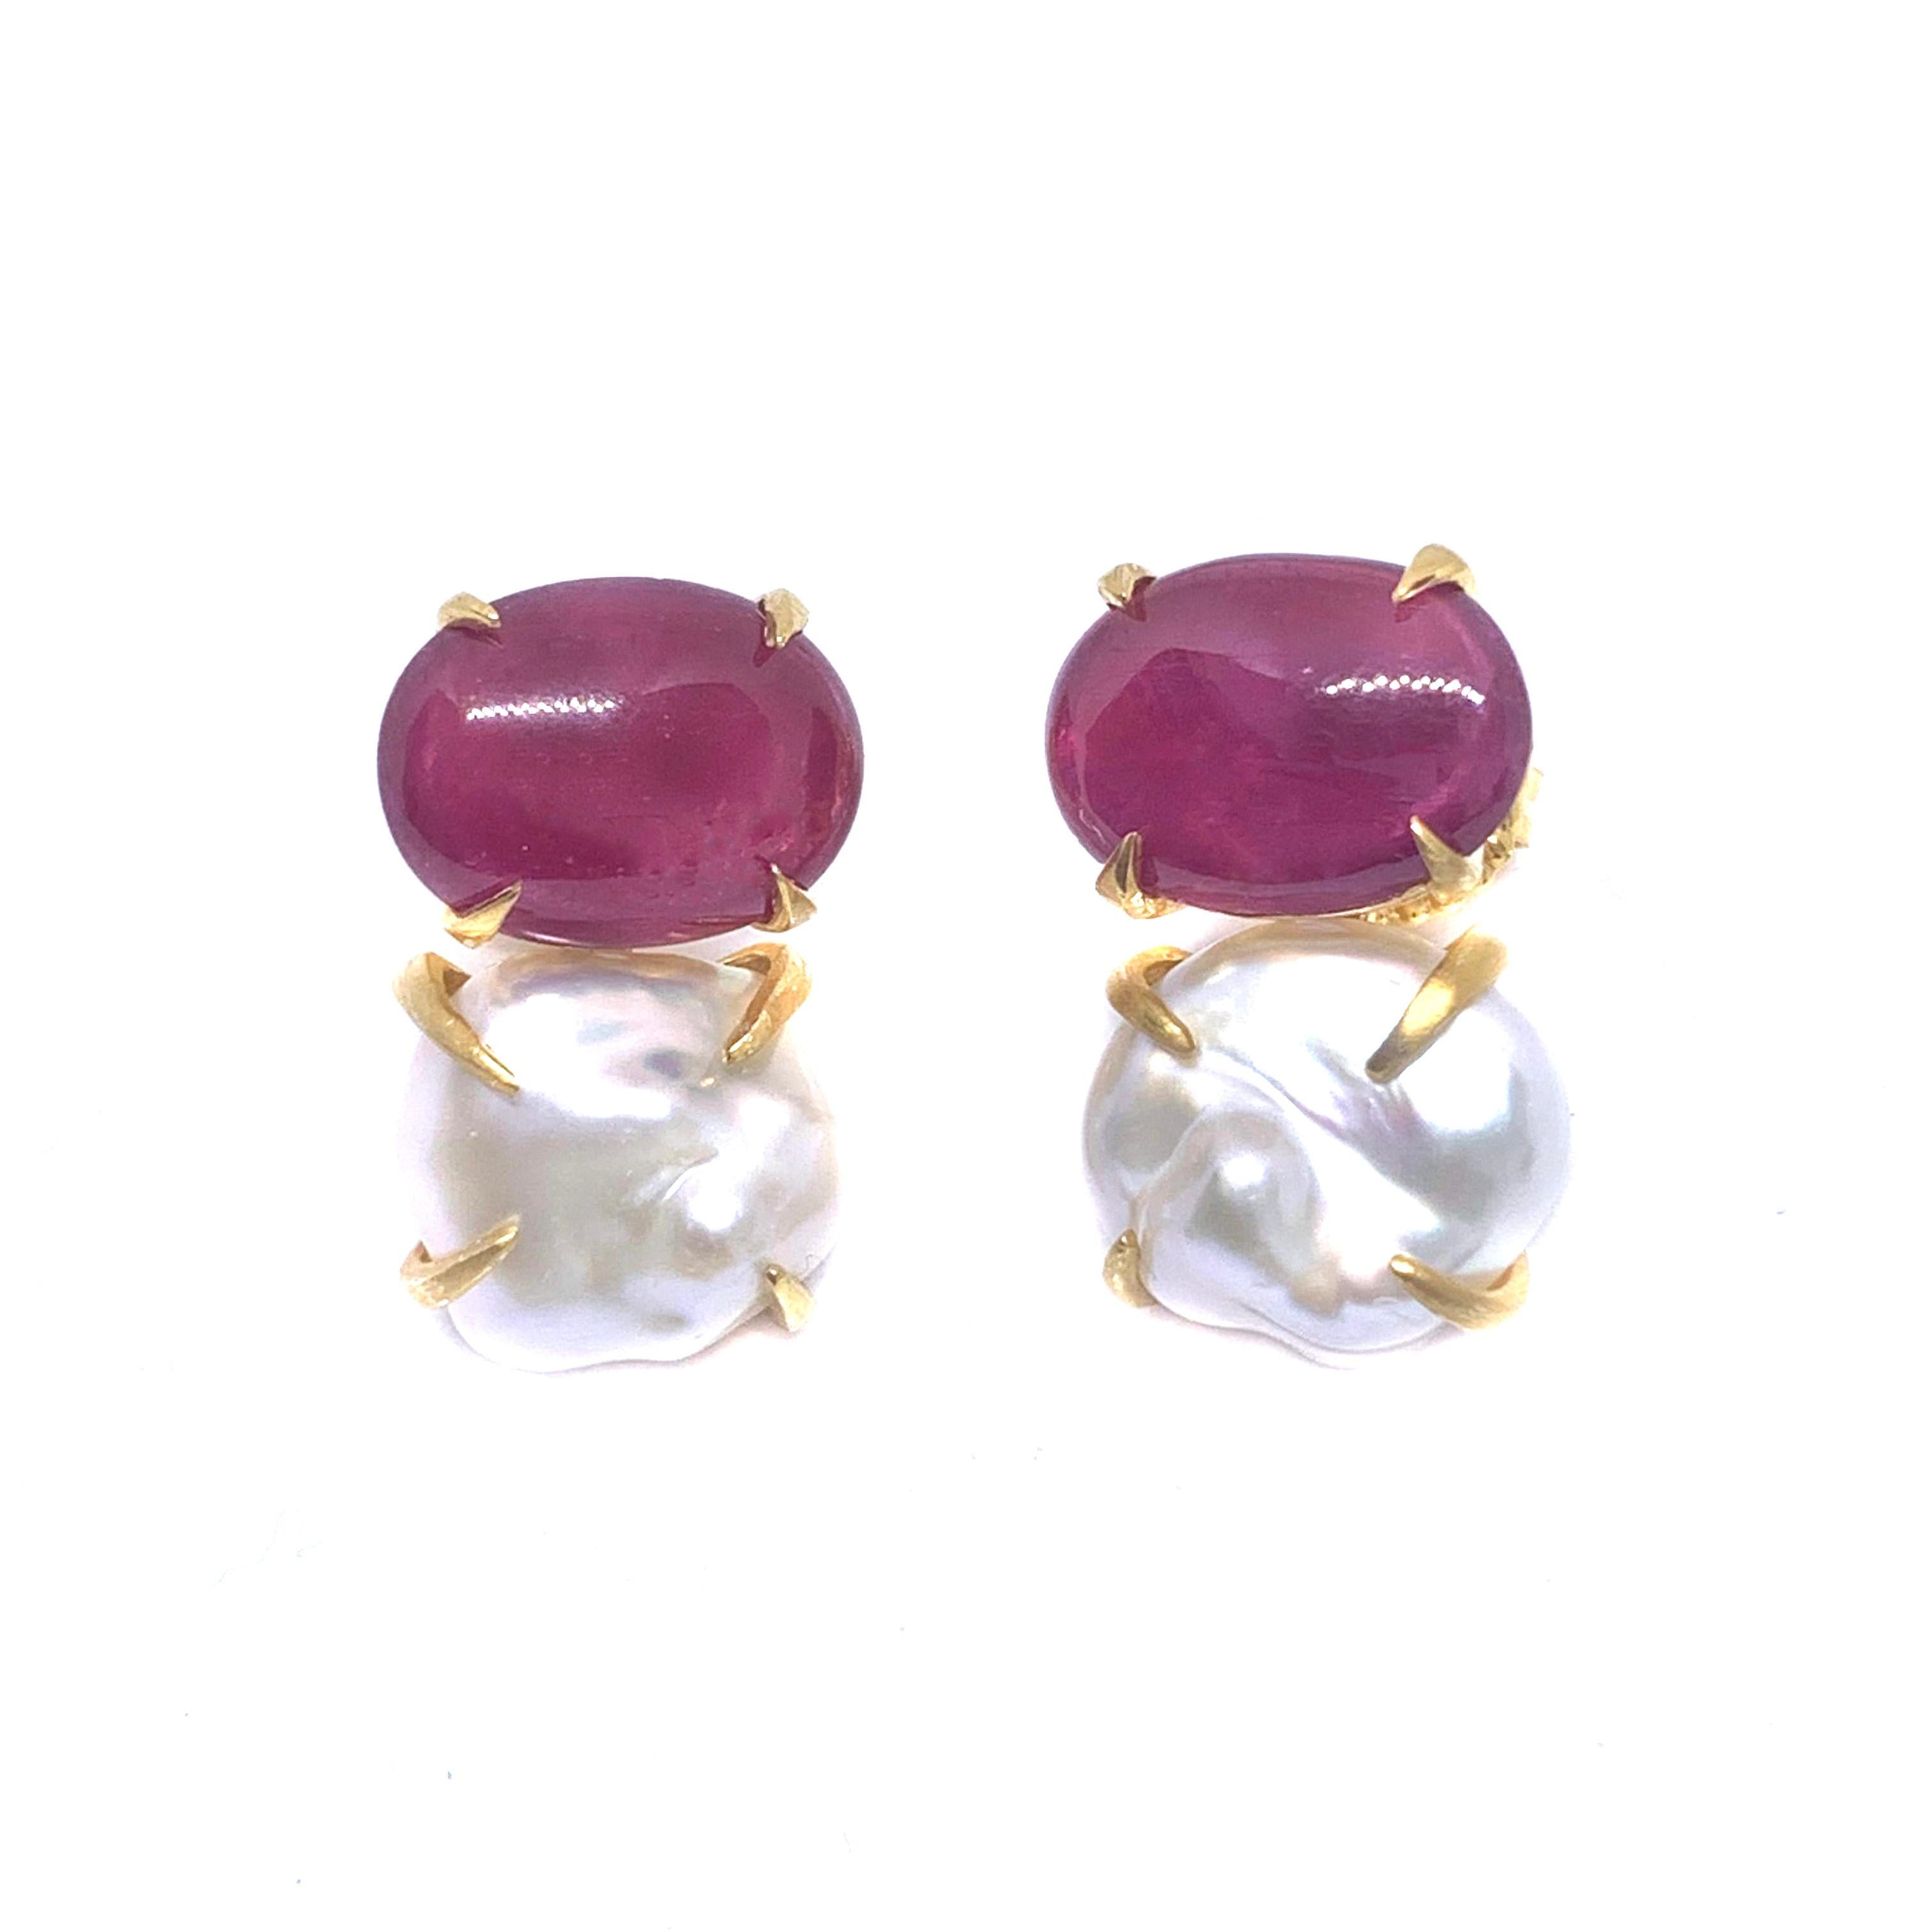 Stunning Bijoux Num Genuine Oval Ruby and Baroque Pearl Vermeil Earrings. 
The earrings feature 2 beautiful pink-ish oval cabochon-cut ruby and 2 lustrous cultured baroque pearl, handset in 18k gold vermeil over sterling silver and brush satin